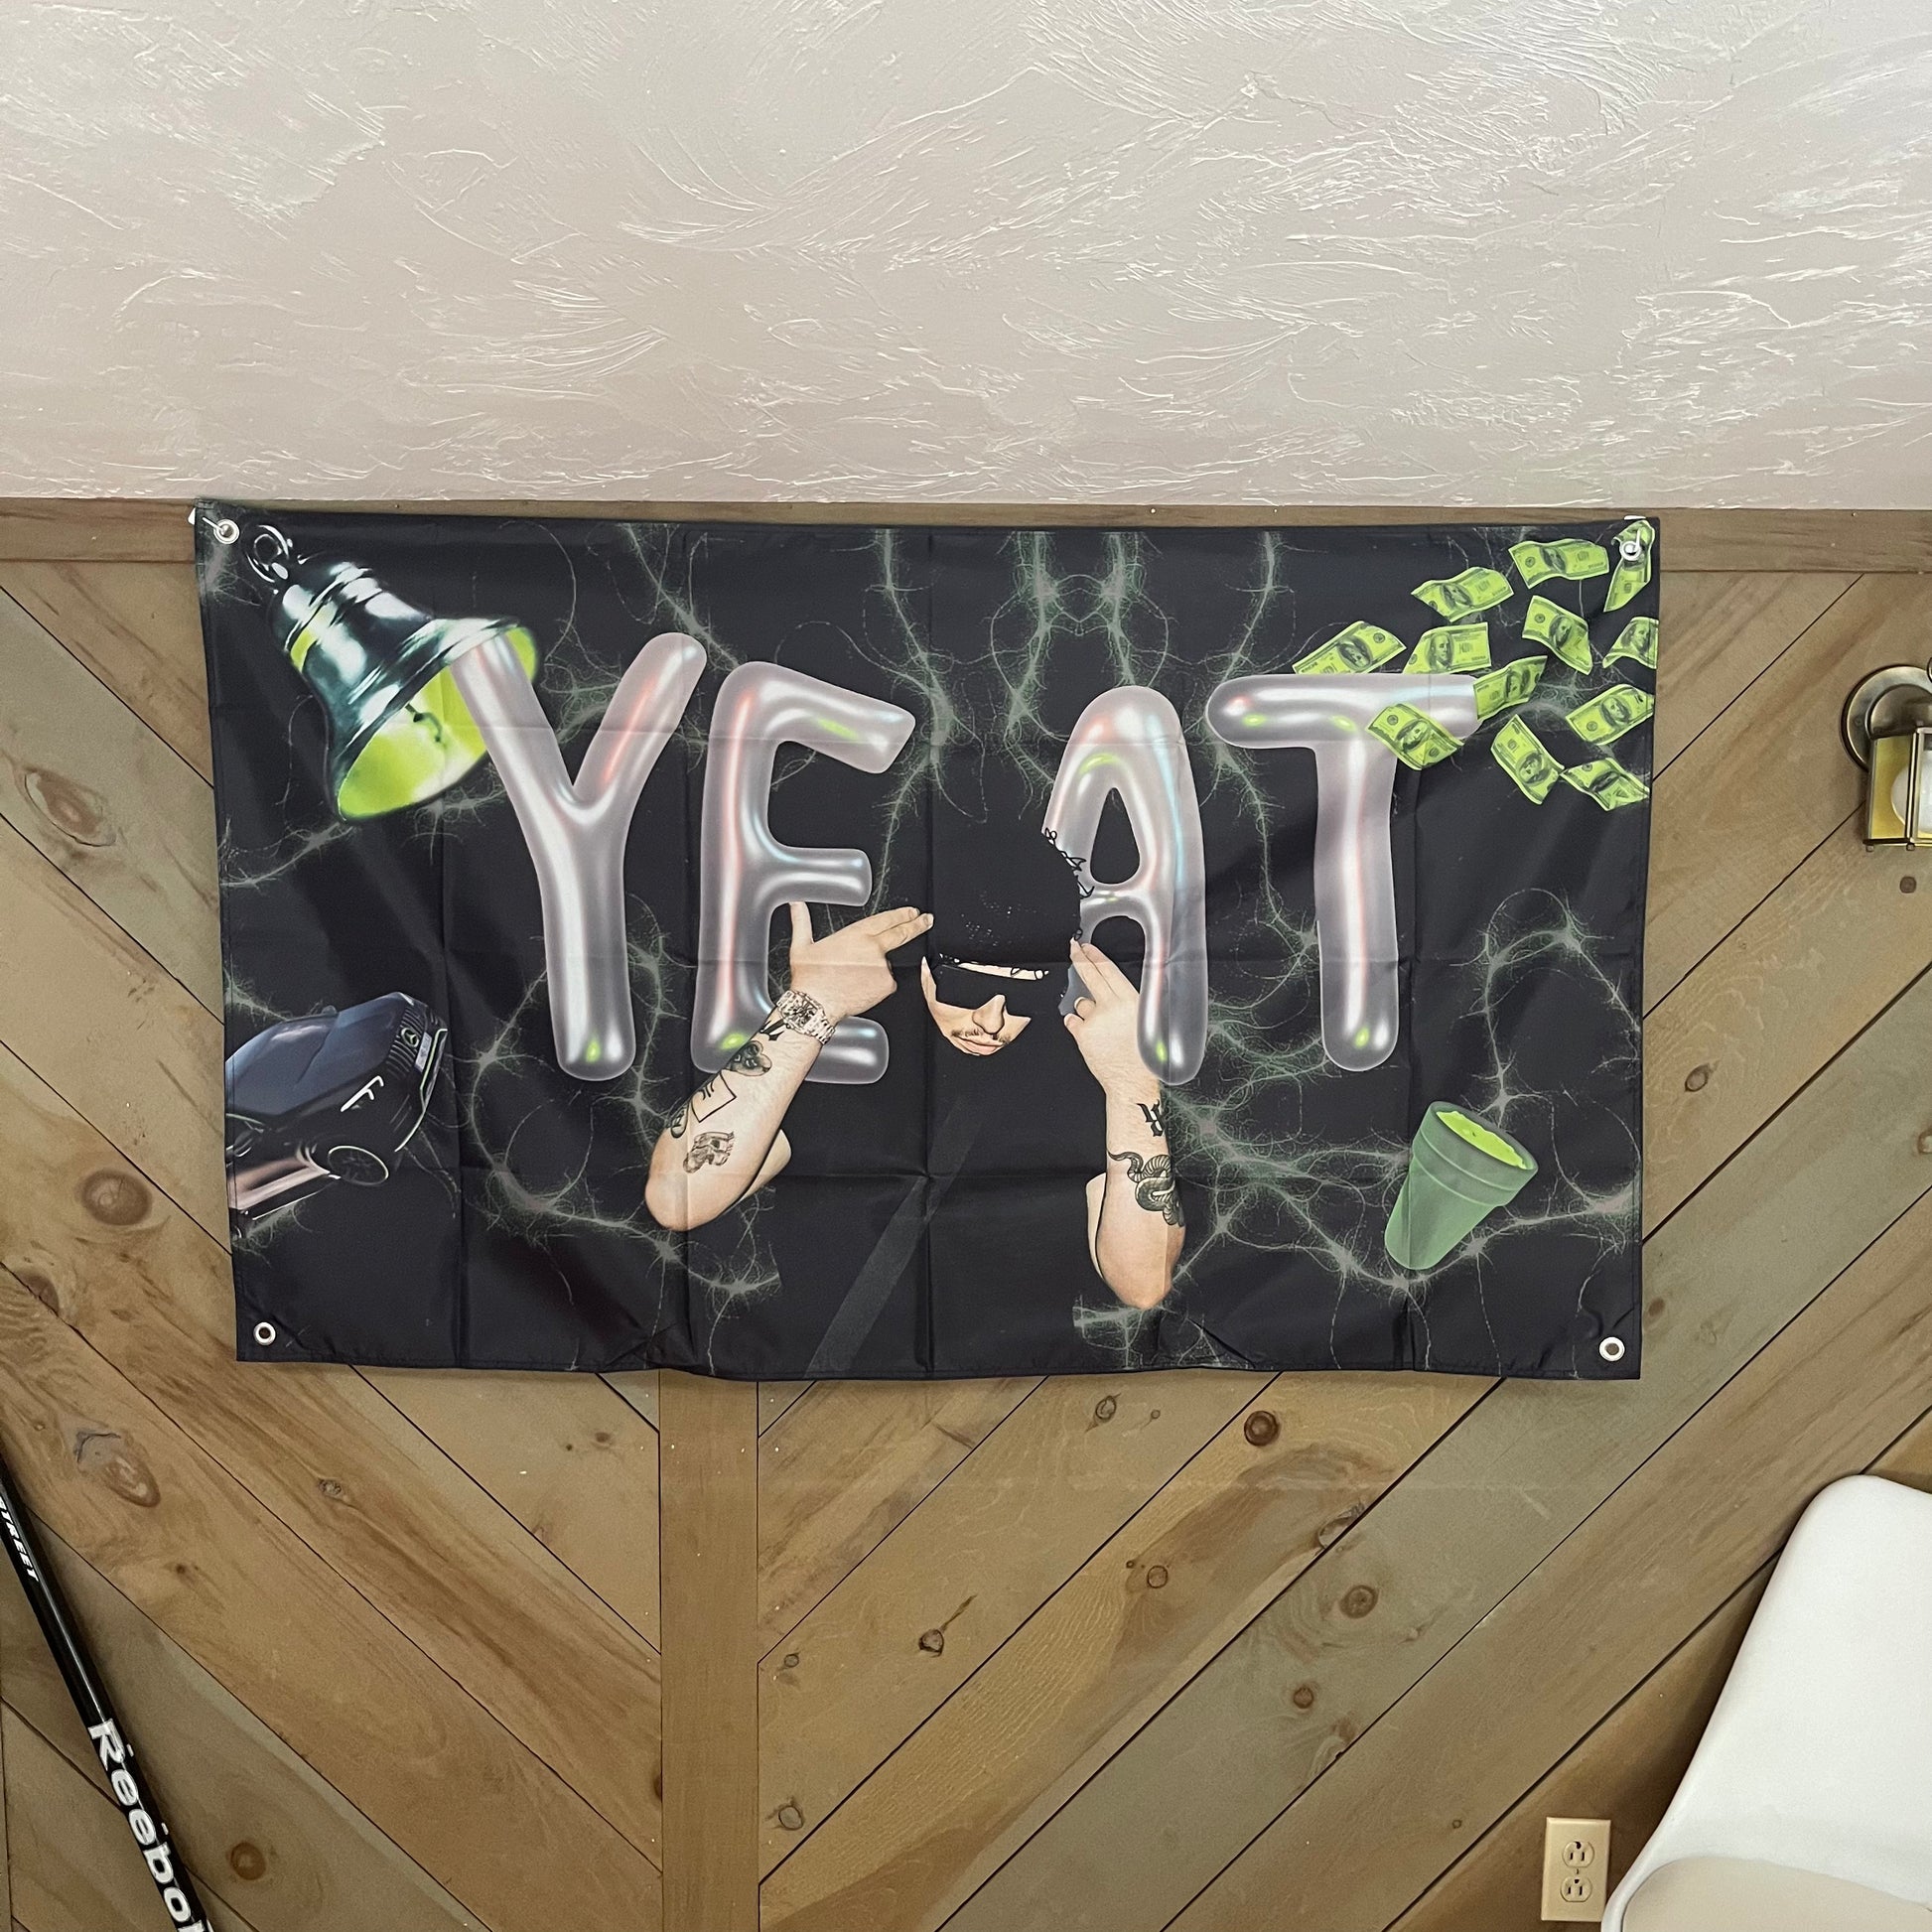 Black flag featuring Yeat in the center with metallic balloon-style letters spelling 'YEAT,' accented by images of cash, a car, a green cup, and an overhead lamp. The background has a neon lightning effect, adding a vibrant and dynamic feel, perfect for fans of the rapper